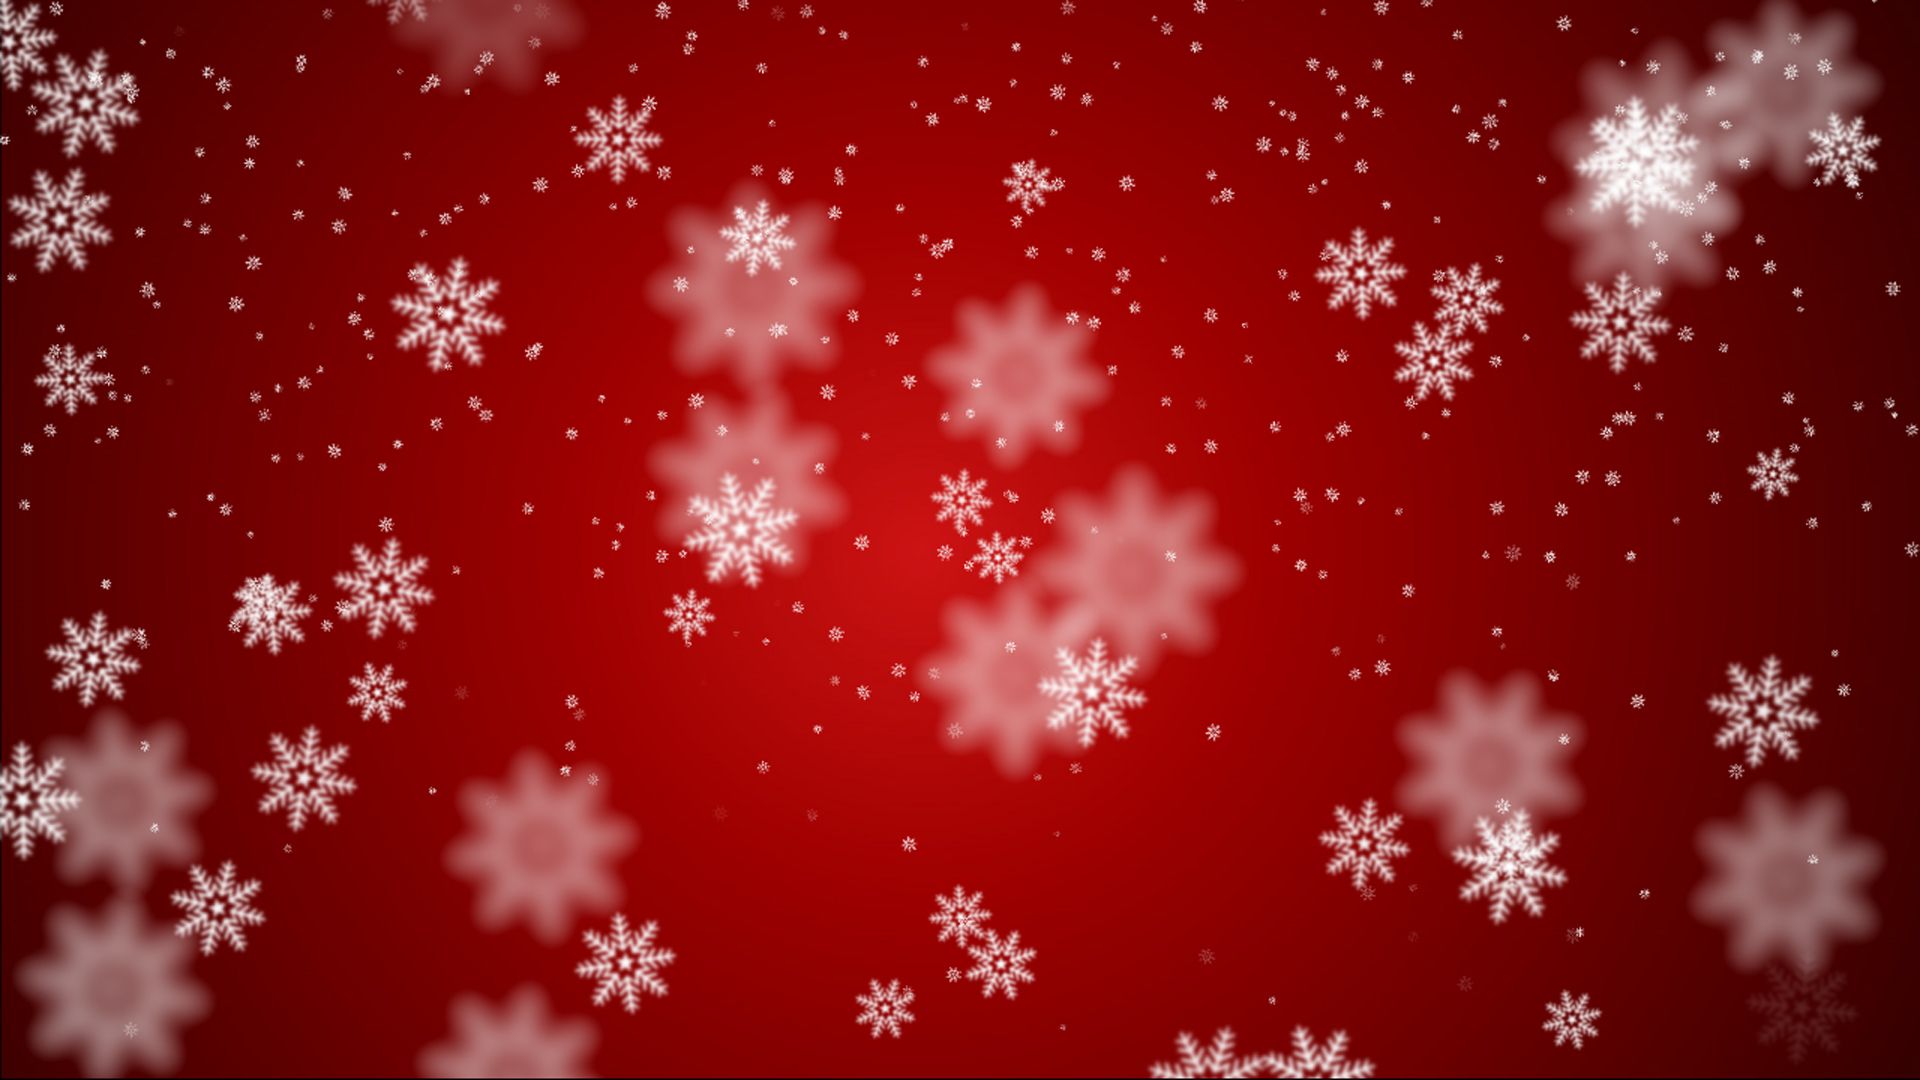 Free Christmas PowerPoint Backgrounds / Wallpapers Download - PPT